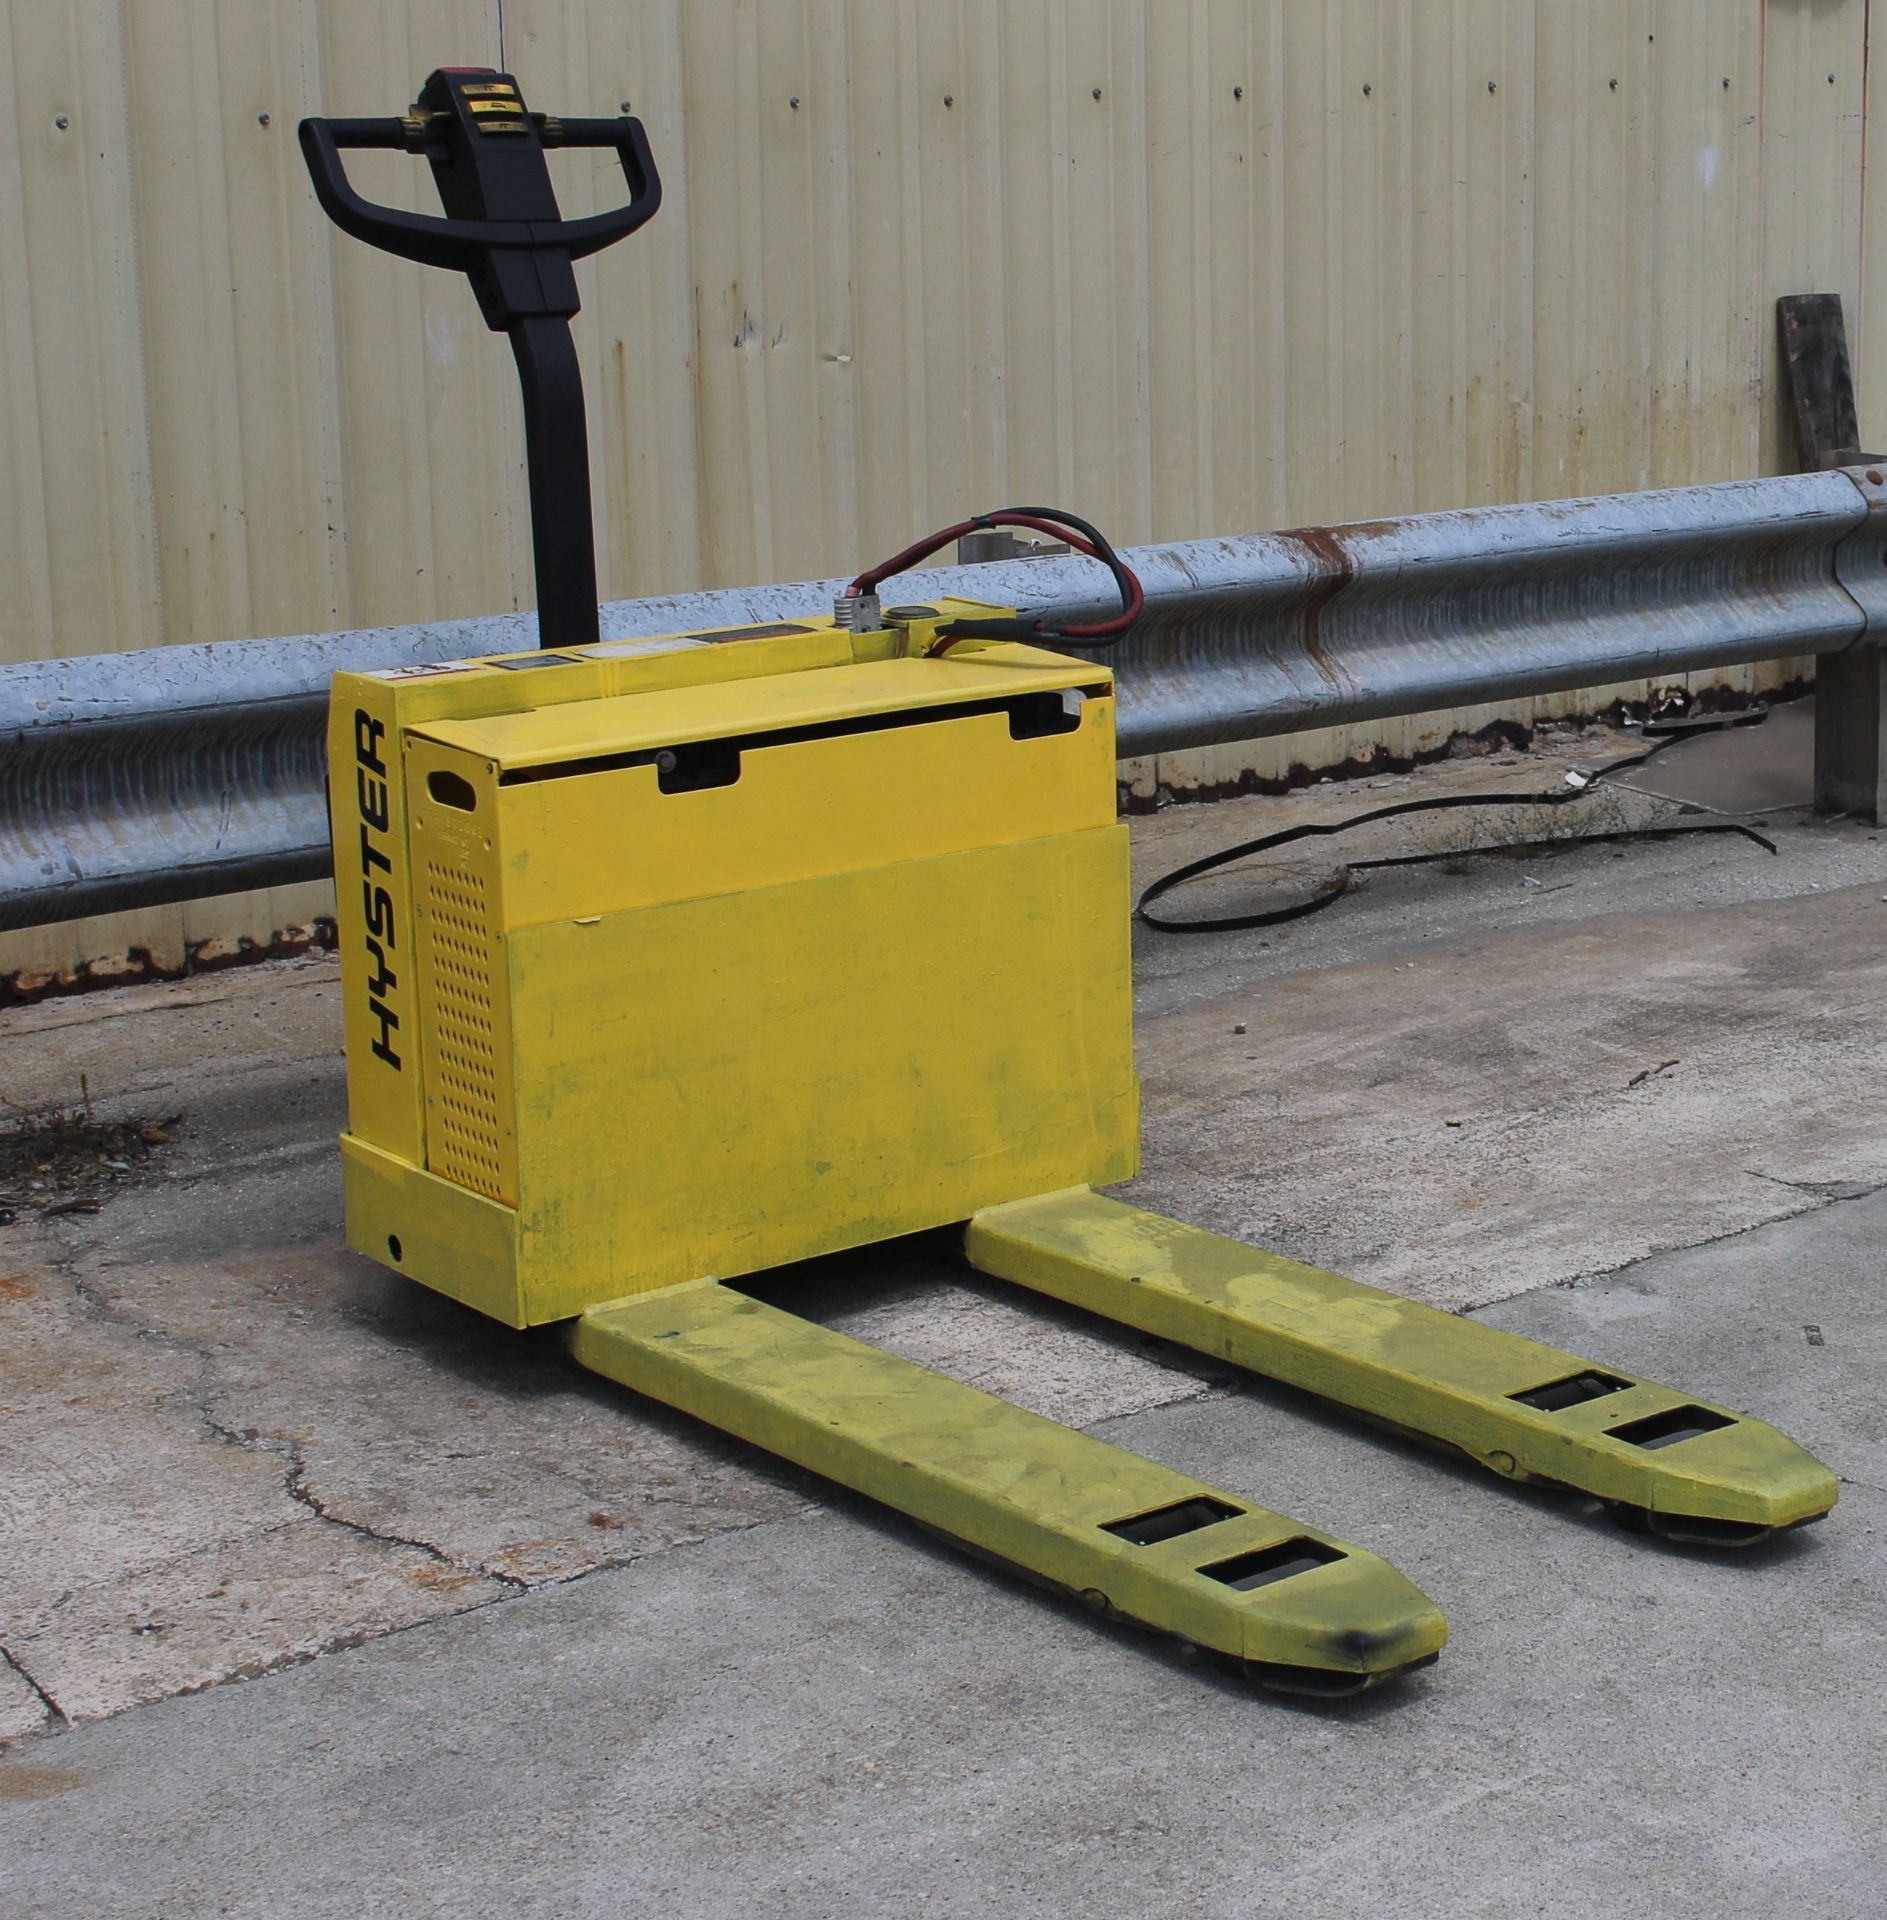 HYSTER 4500 LBS CAPACITY ELECTRIC PALLET JACK (WATCH VIDEO)